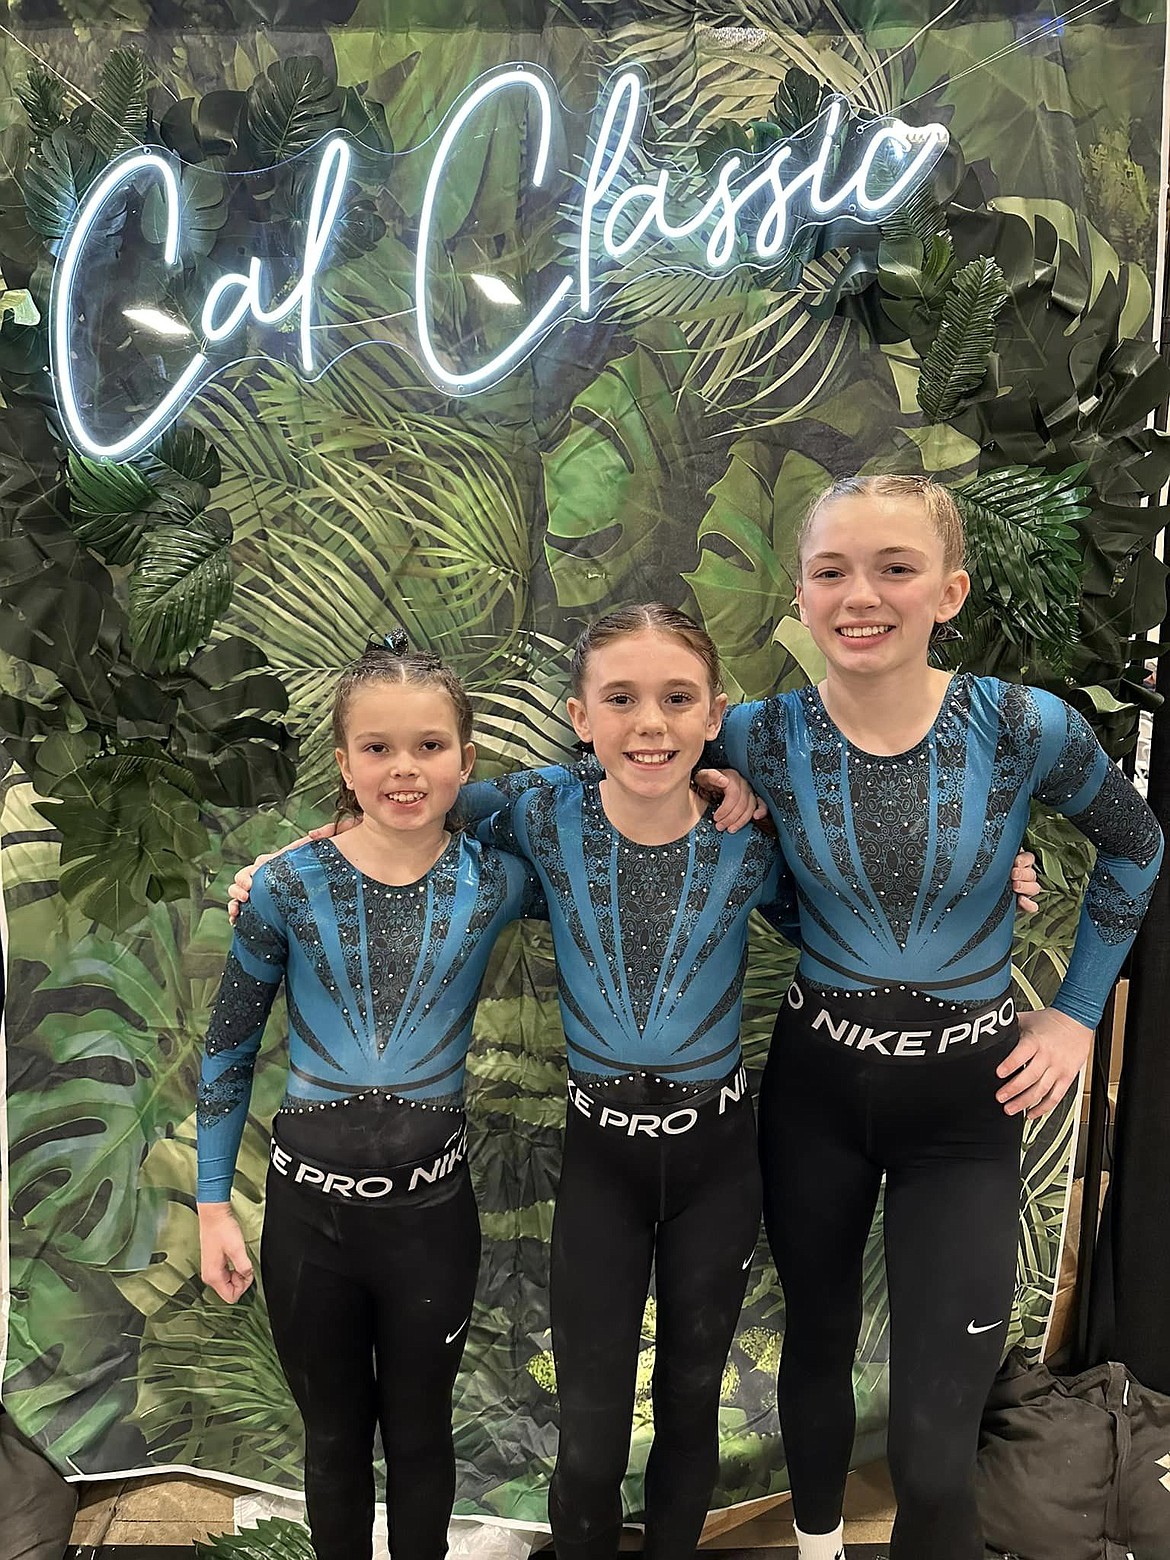 Courtesy photo
Technique Gymnastics Level 5 team traveled to Del Mar, Calif., to compete at the SCEGA California Classic. From left are Novalee Brock (8.275 on FX), Makenna Scholten (8.8 on VT) and Mallory Secord (8.675 on VT).